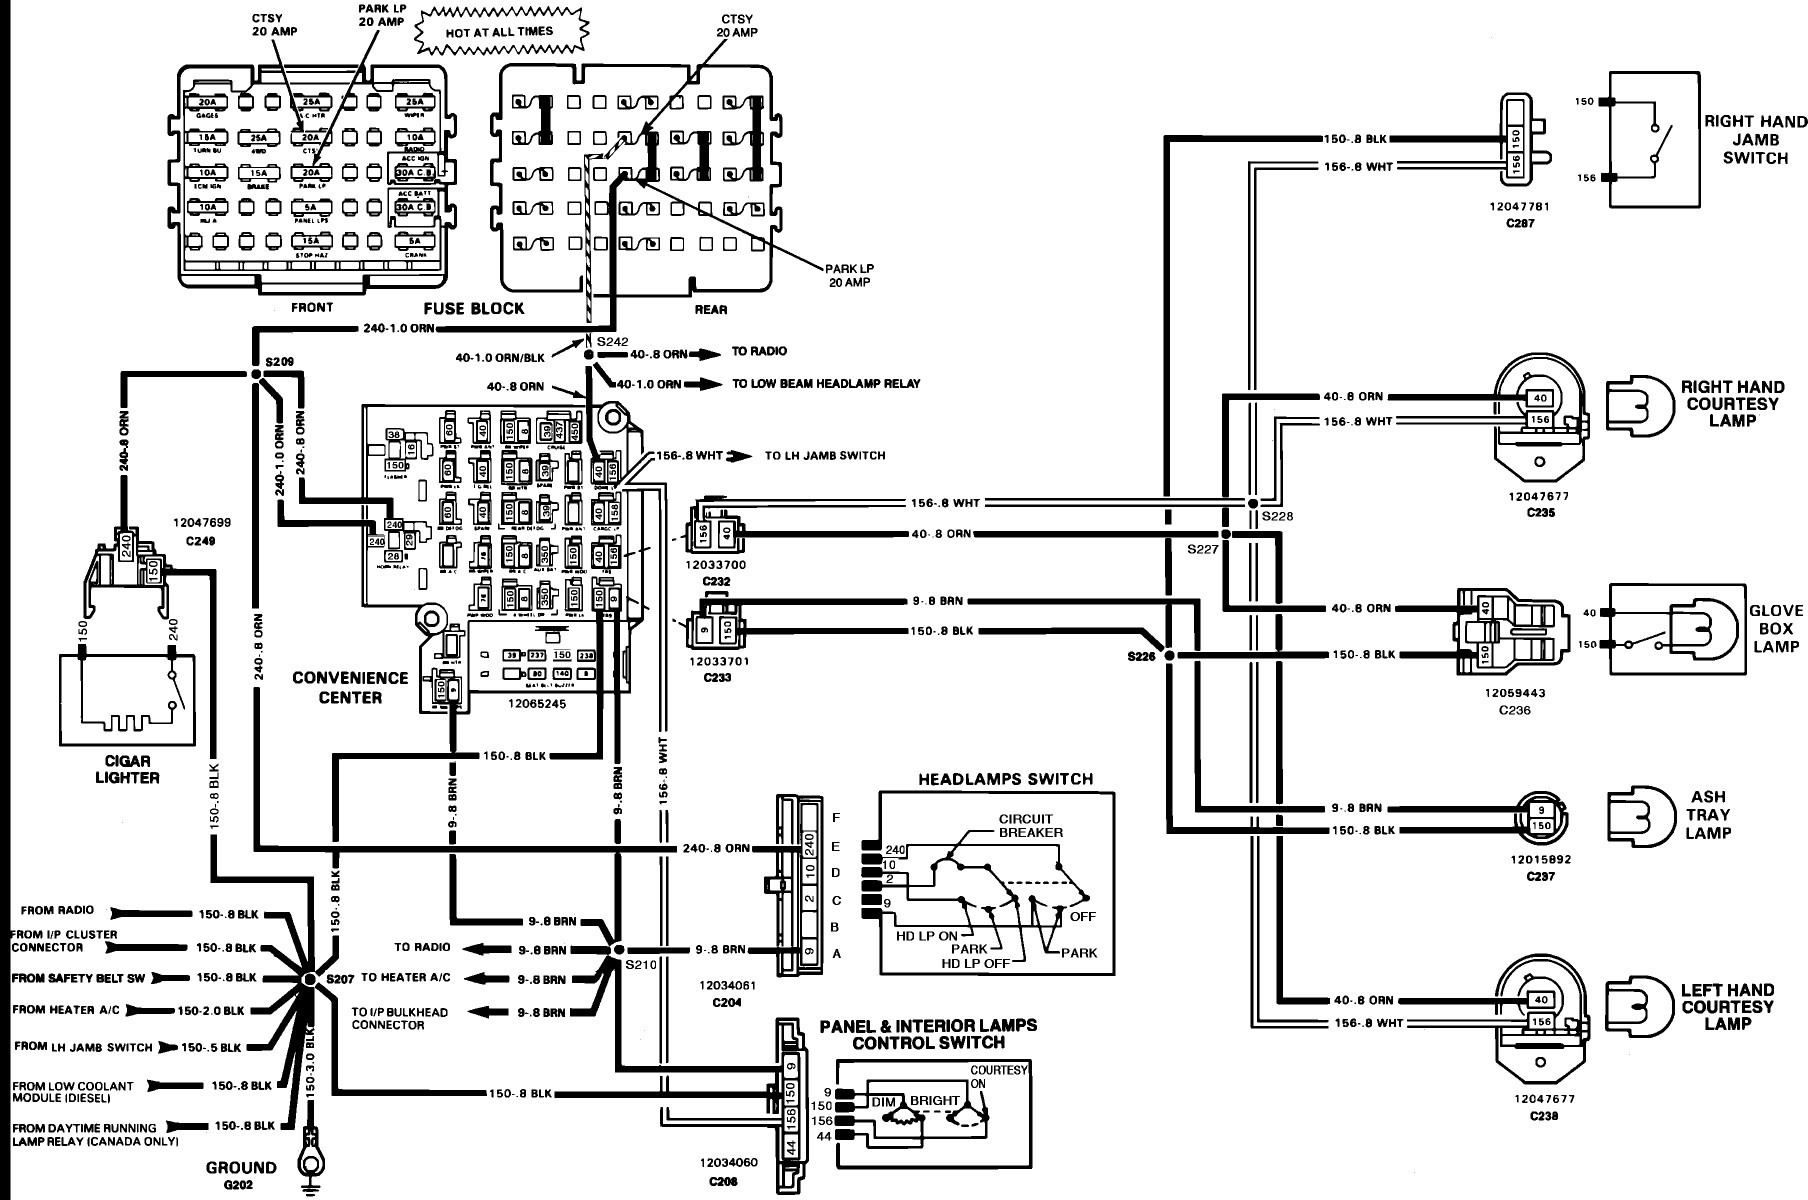 1995 toyota Tacoma Parts Diagram Diagram Showing You the Parts and Troubled area the Wiring Of 1995 toyota Tacoma Parts Diagram